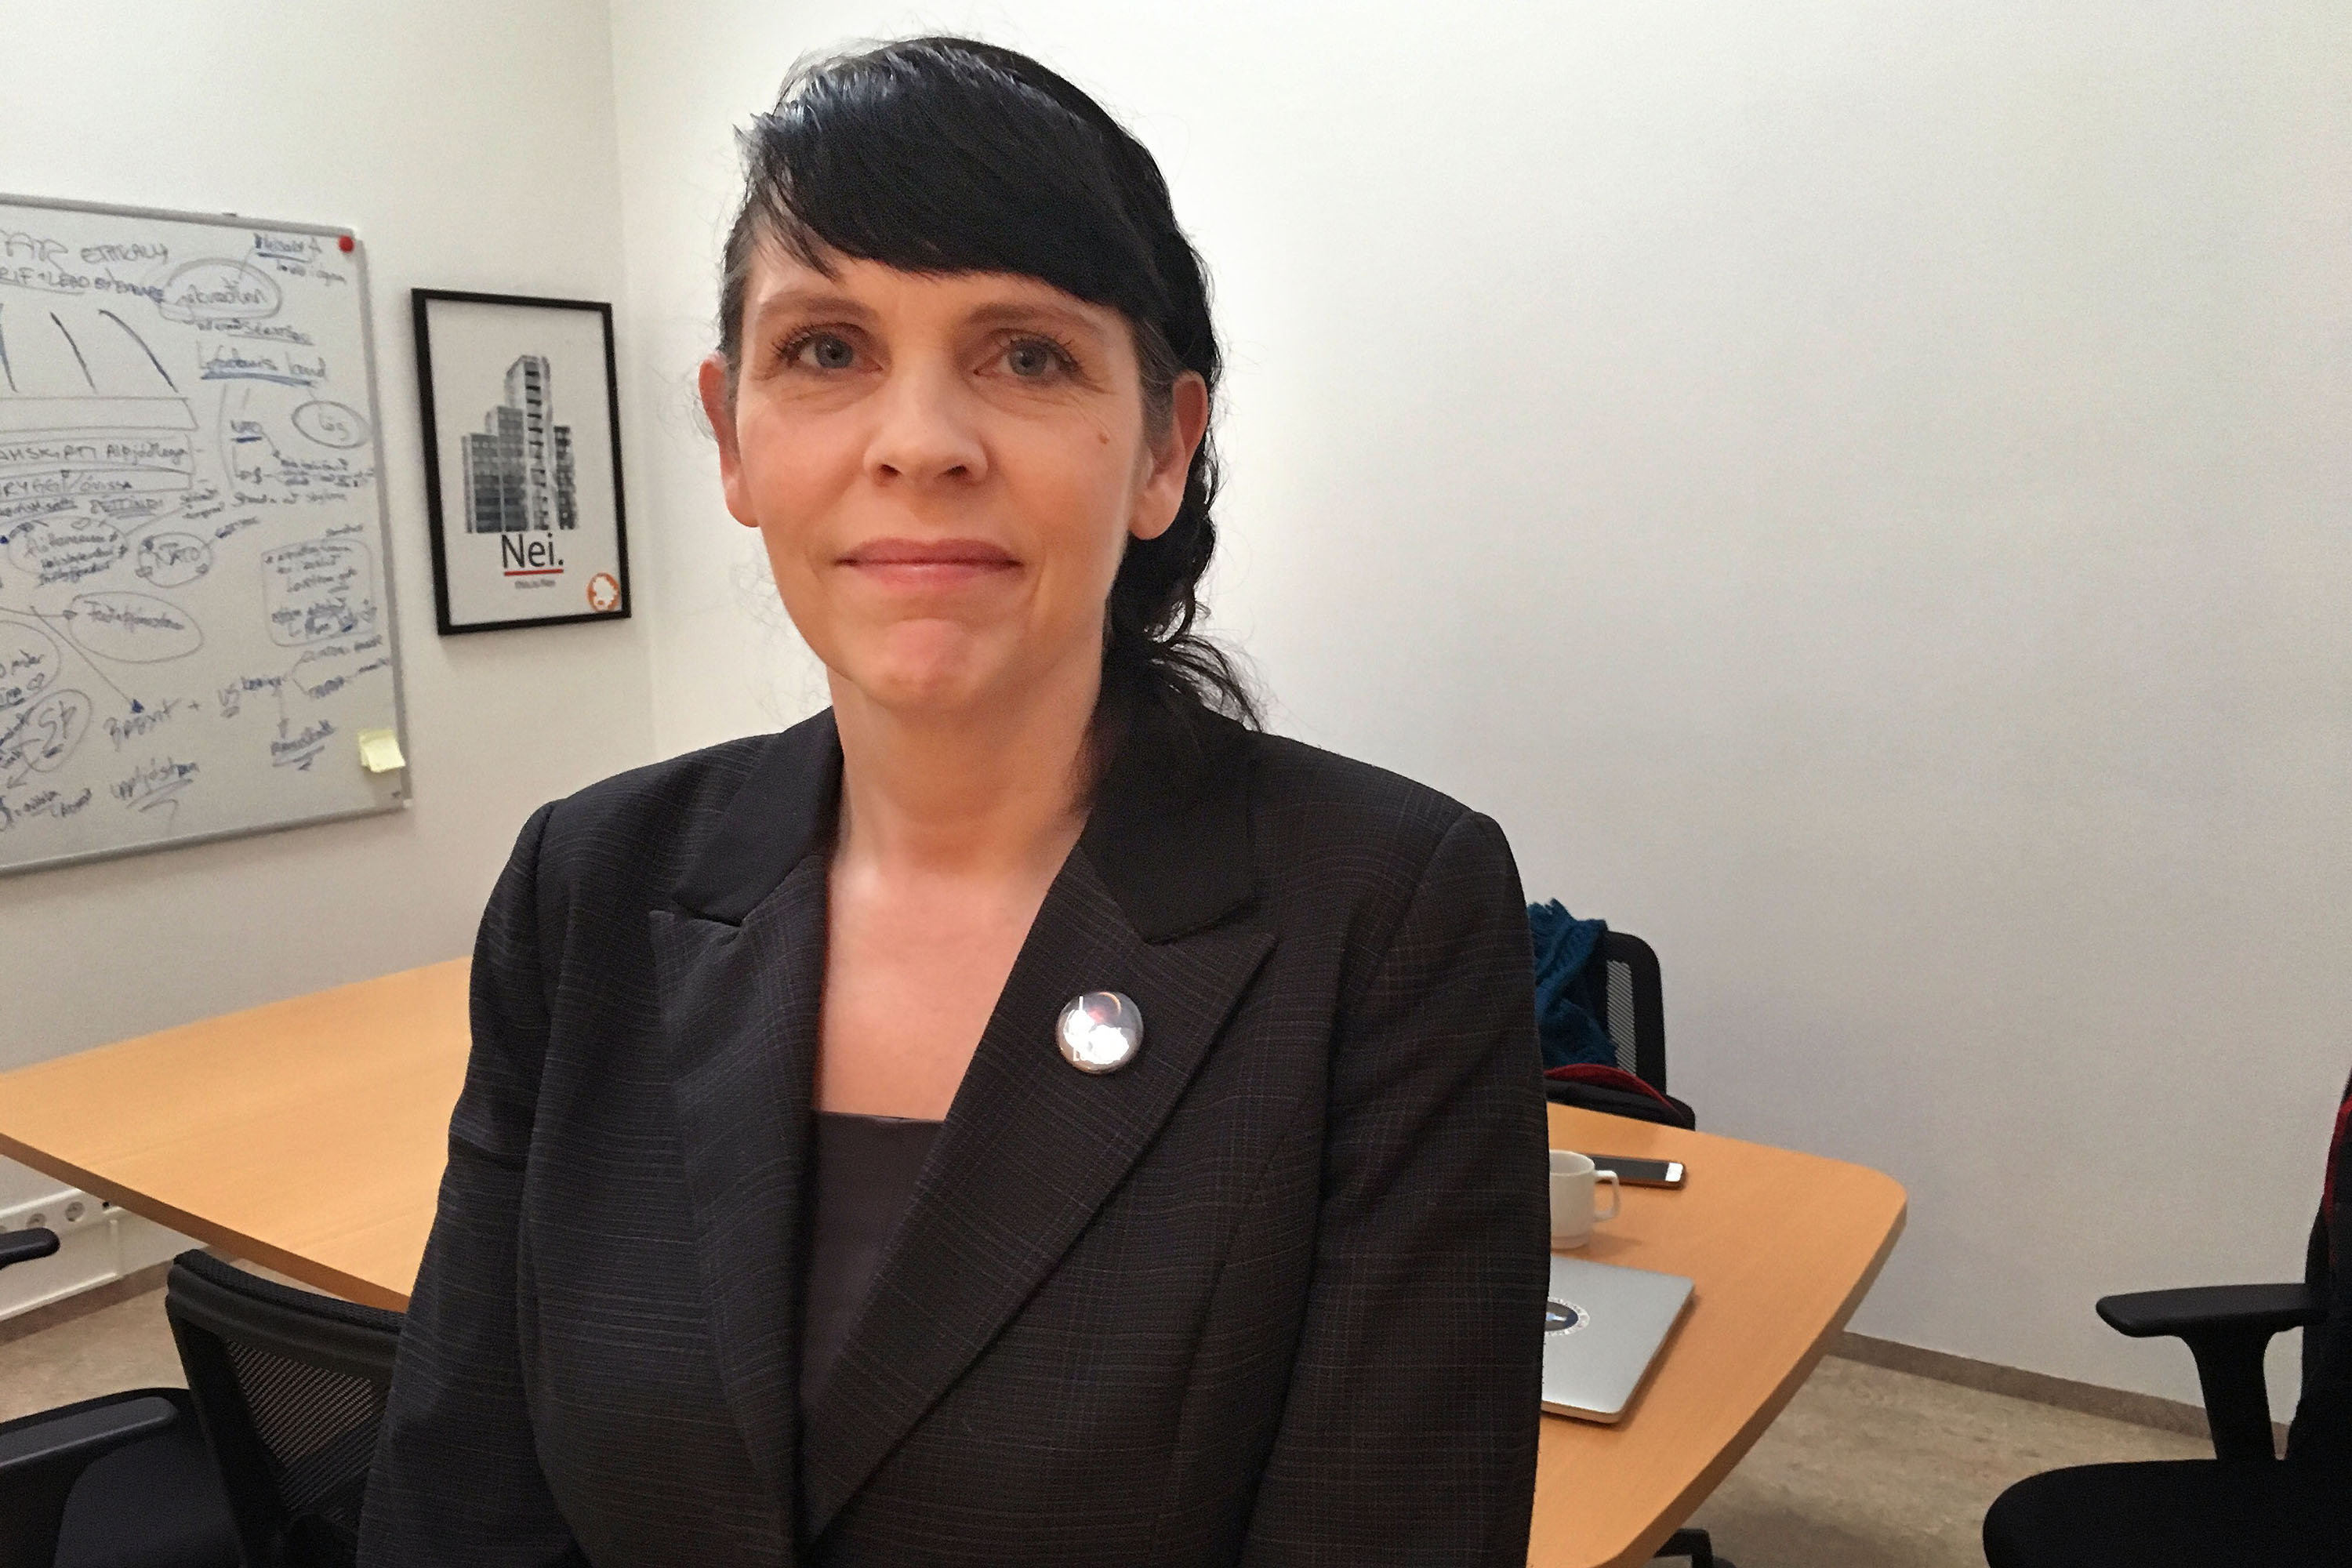 The rise of the Pirate Party- from radical fringe to focal point of Icelandic politics - has astonished even the party's founder, Birgitta Jonsdottir, seen at the party's office in Reykjavik, Iceland, on Oct. 20. (Griff Witte / Washington Post)